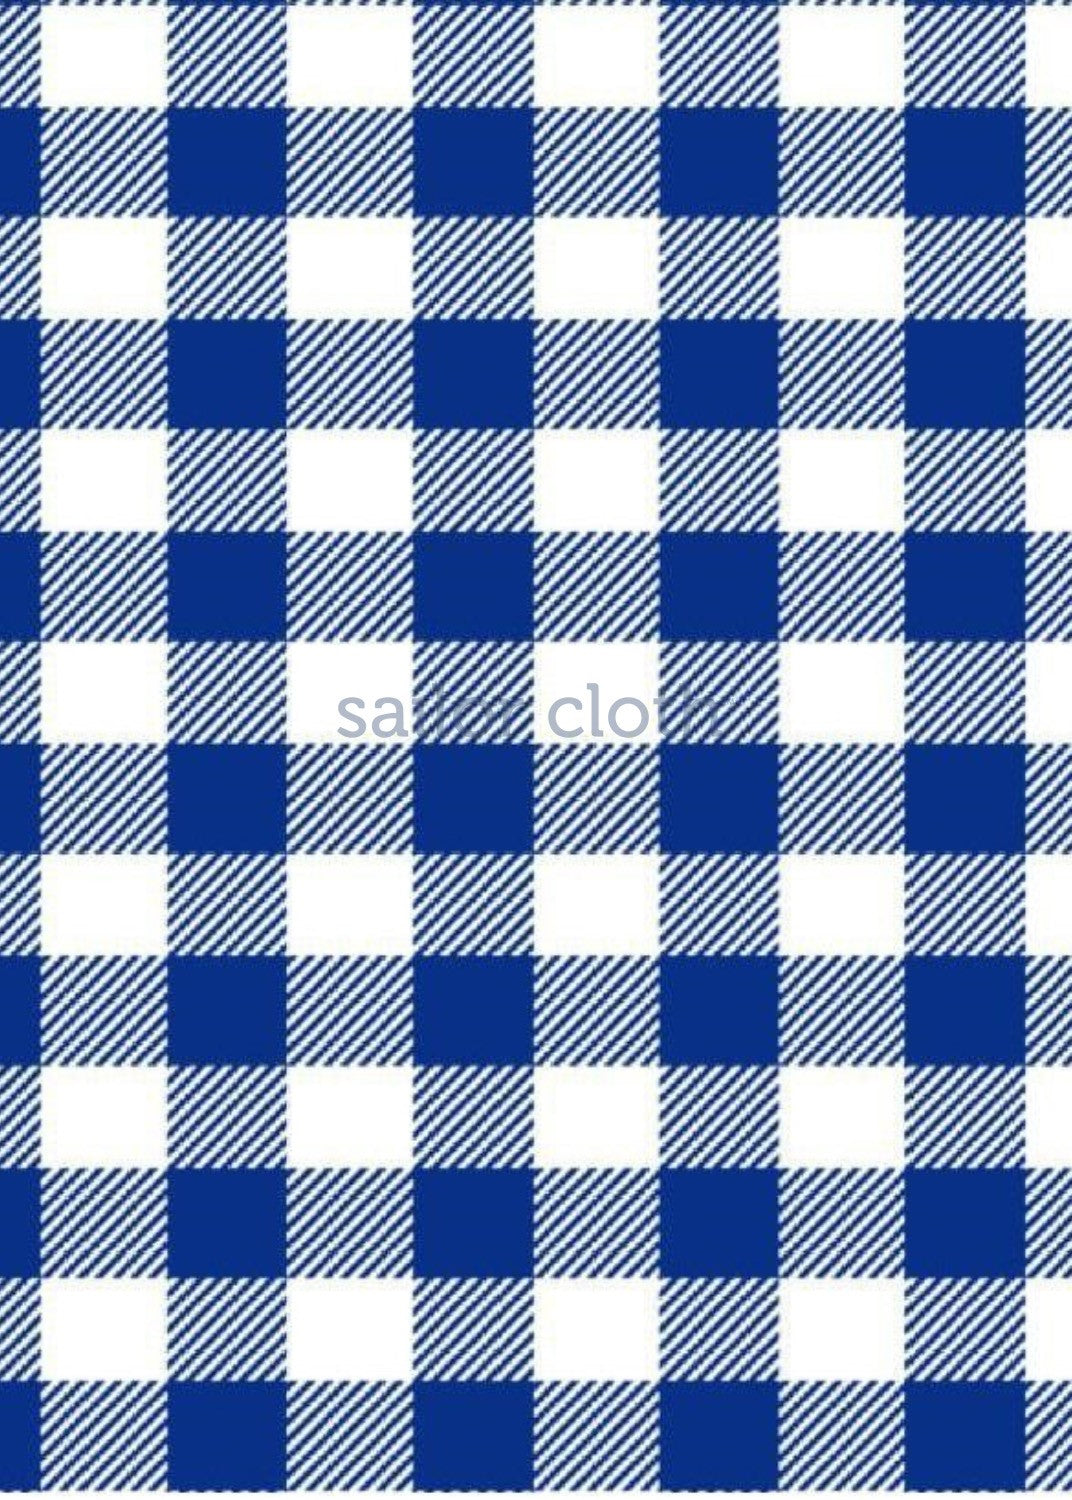 Lucille Maxi Dress - Gingham Check Blue/White